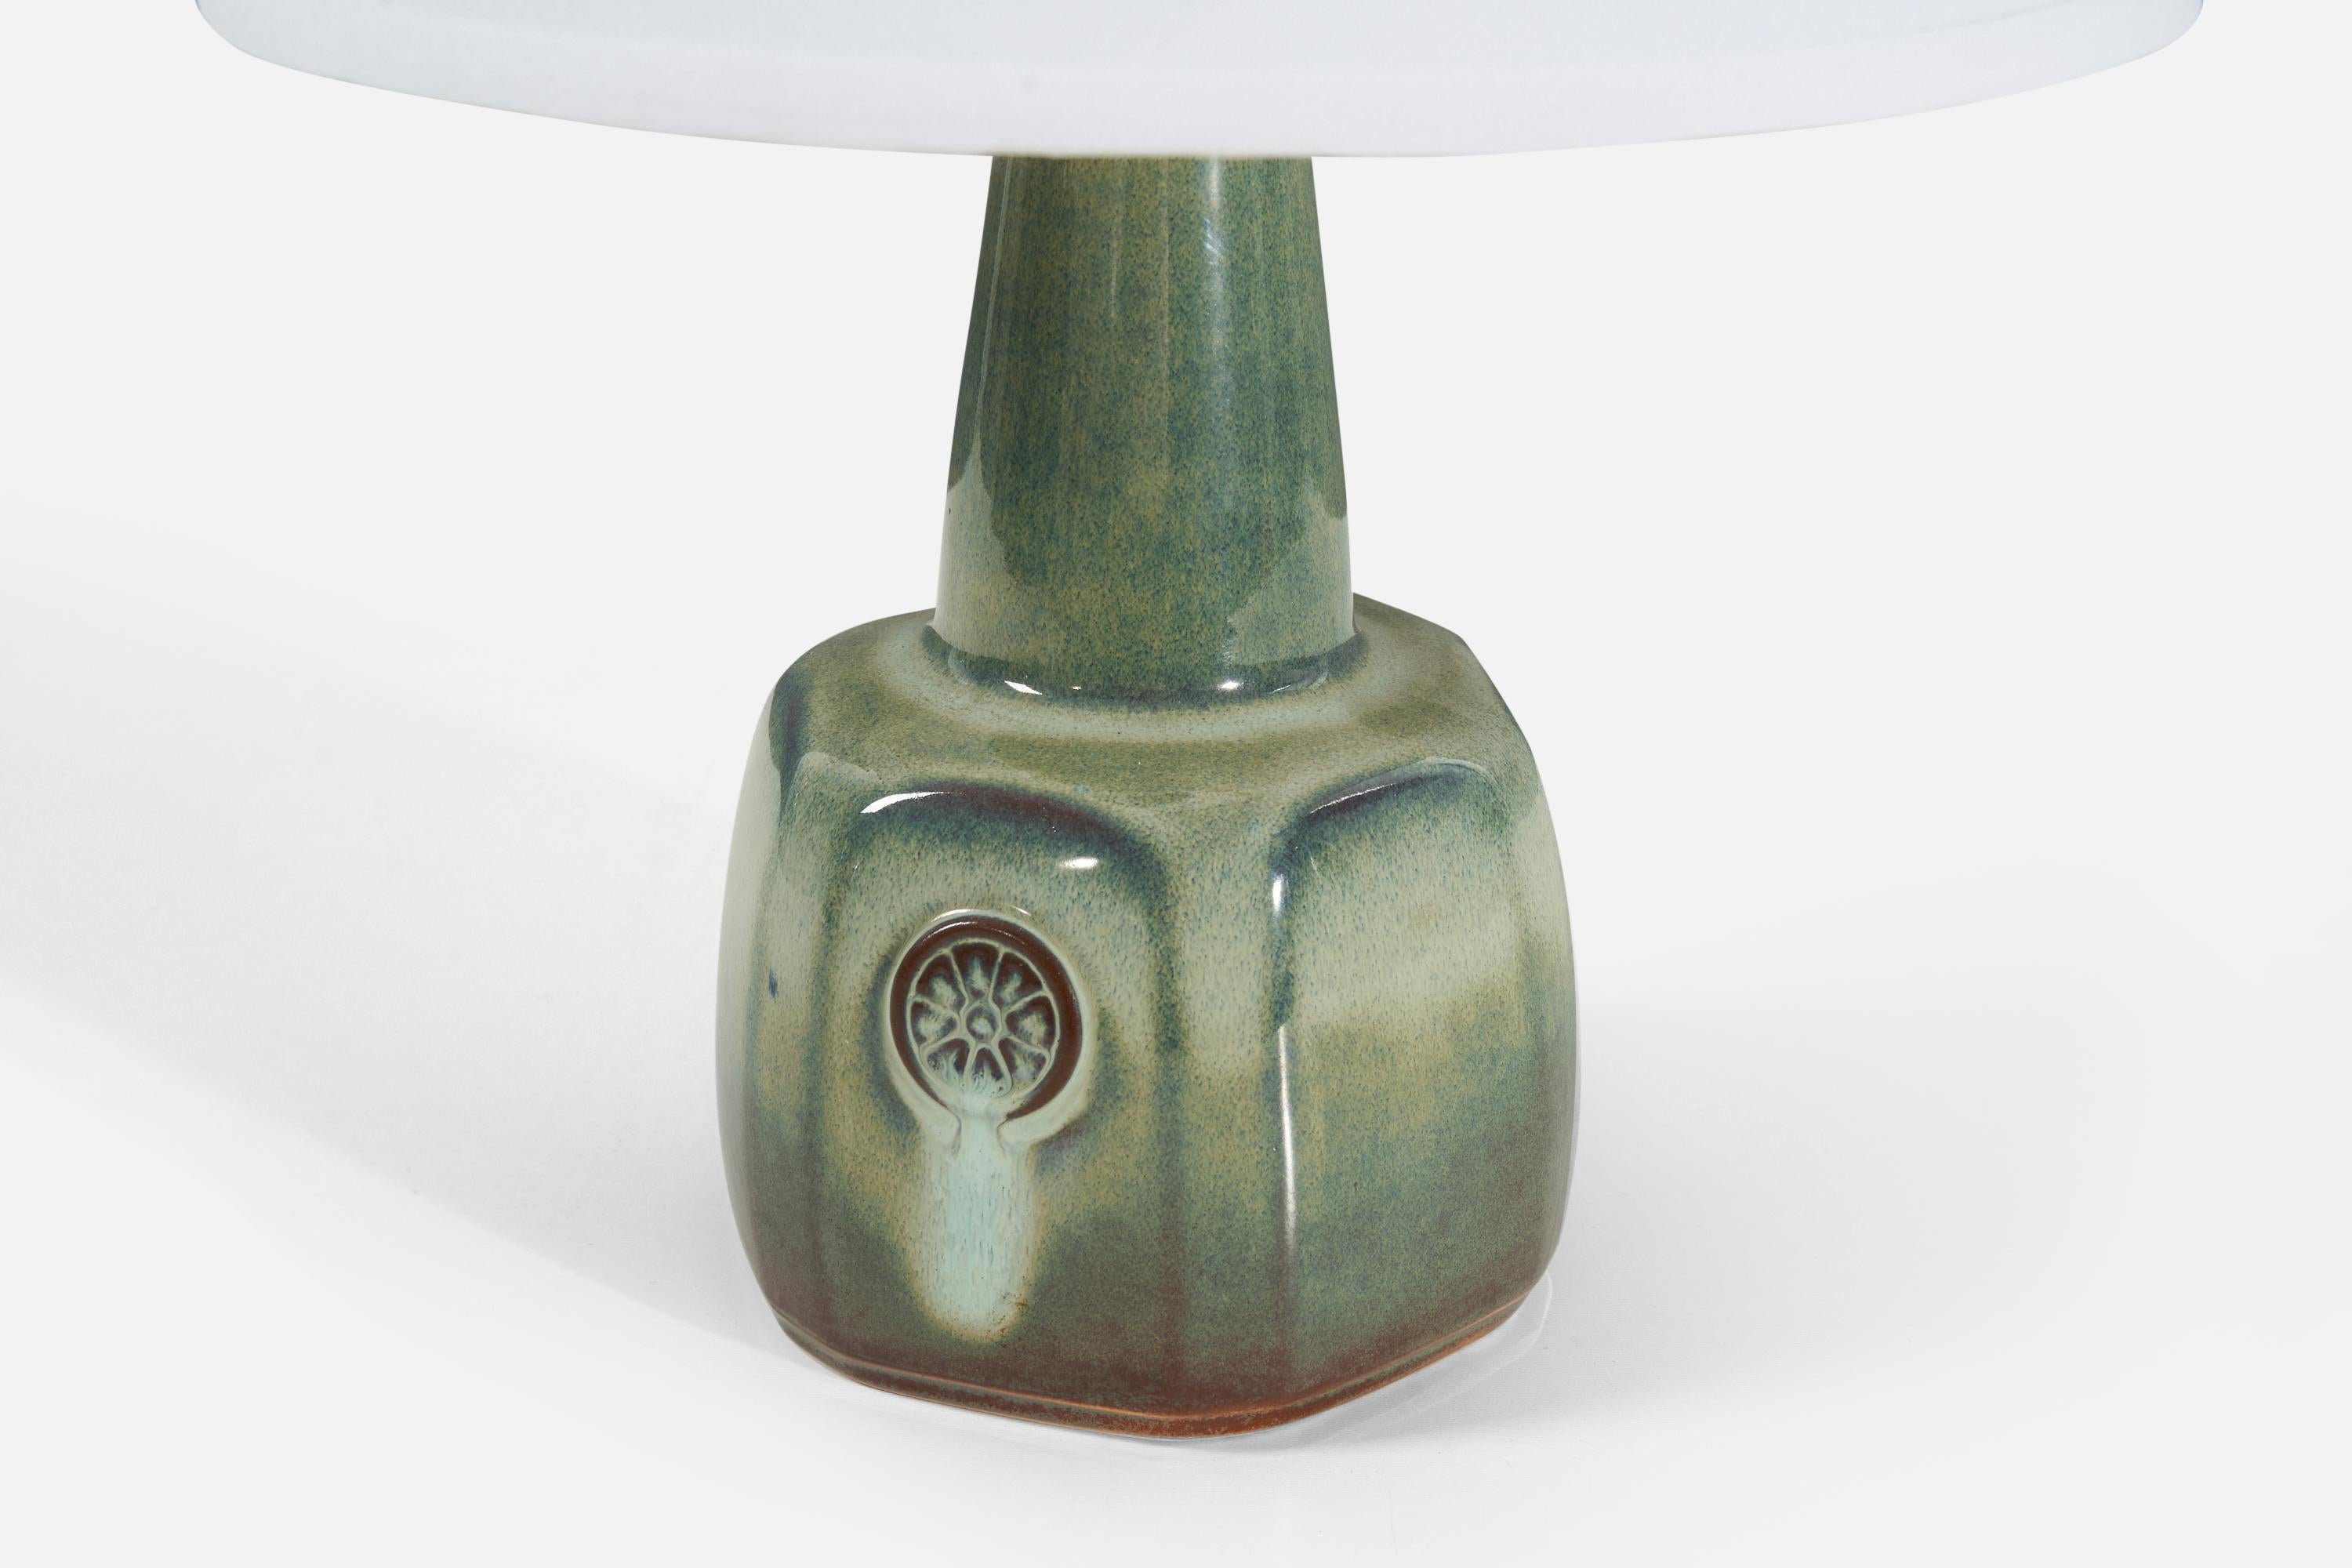 Søholm Stentøj, Table Lamp, Green-Glazed Stoneware, Sweden, 1960s In Good Condition For Sale In High Point, NC